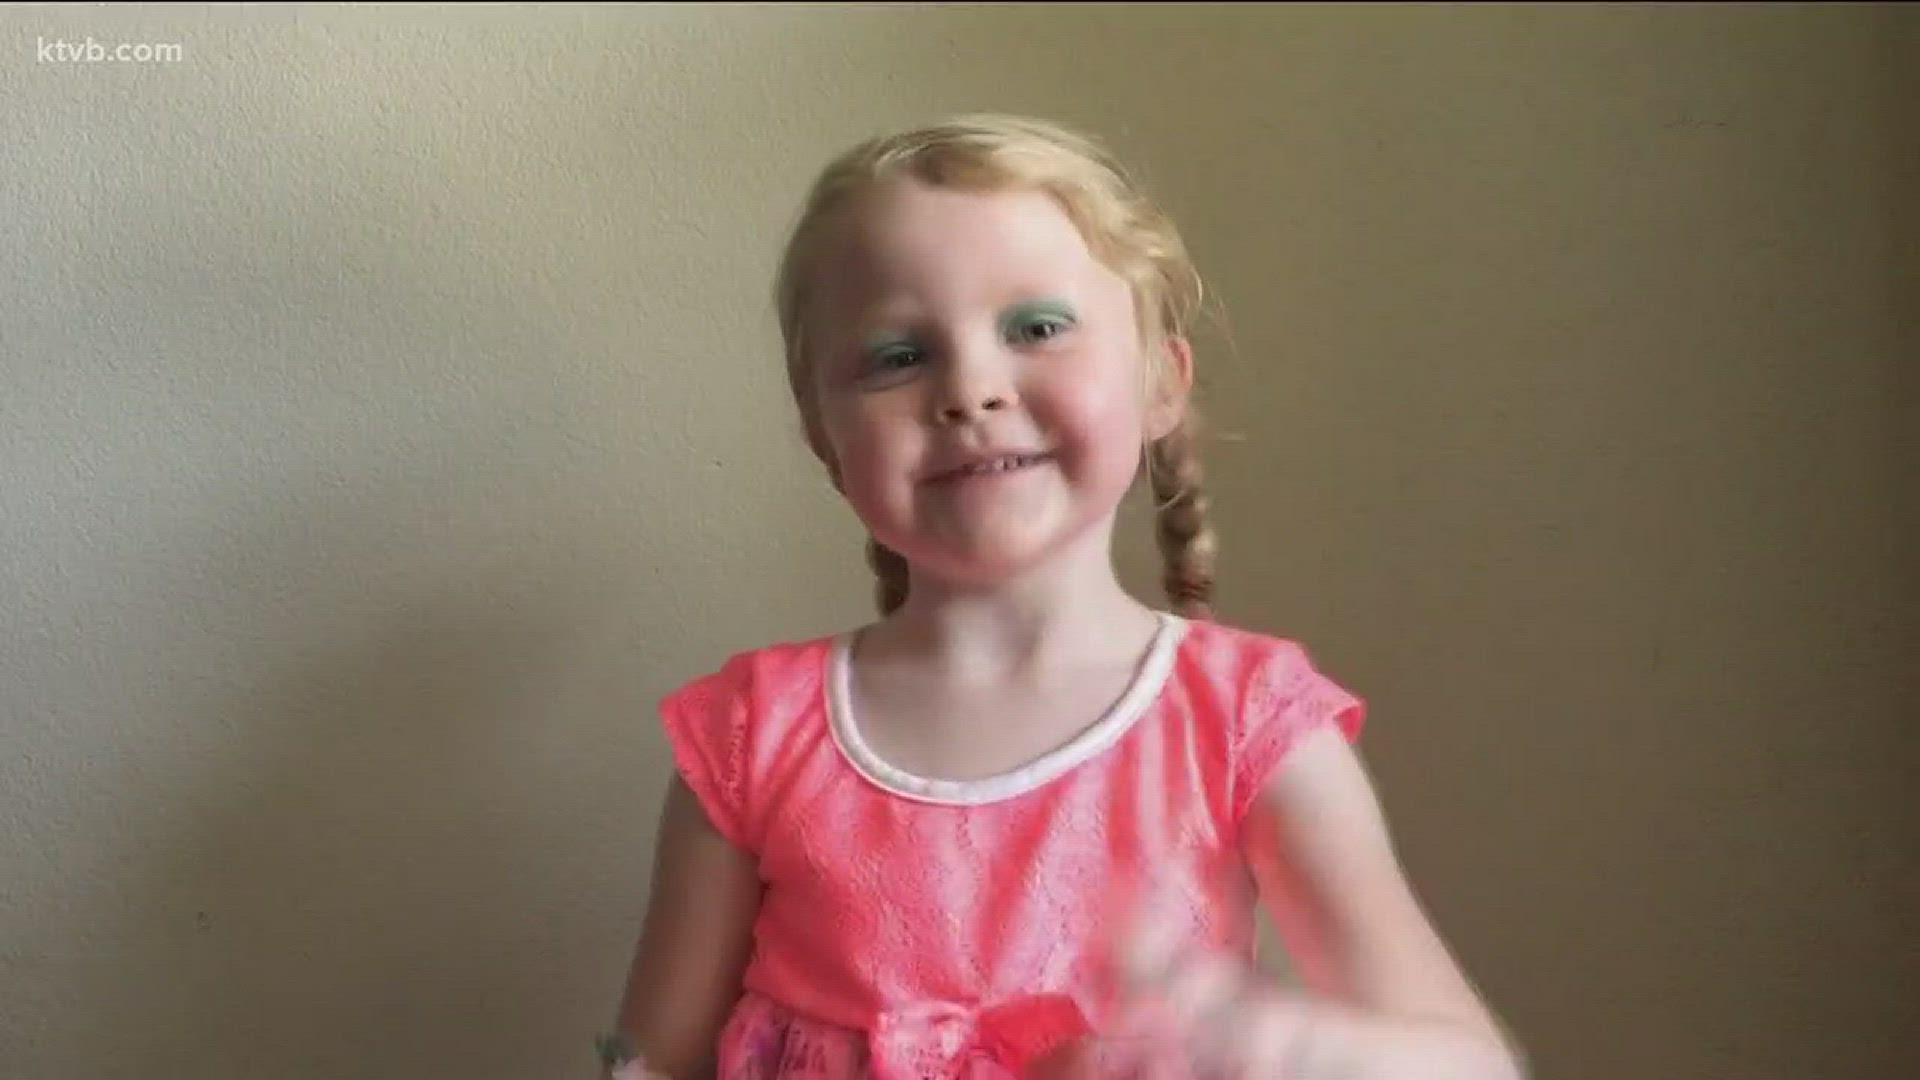 Young Girl does a cute make-up tutorial.